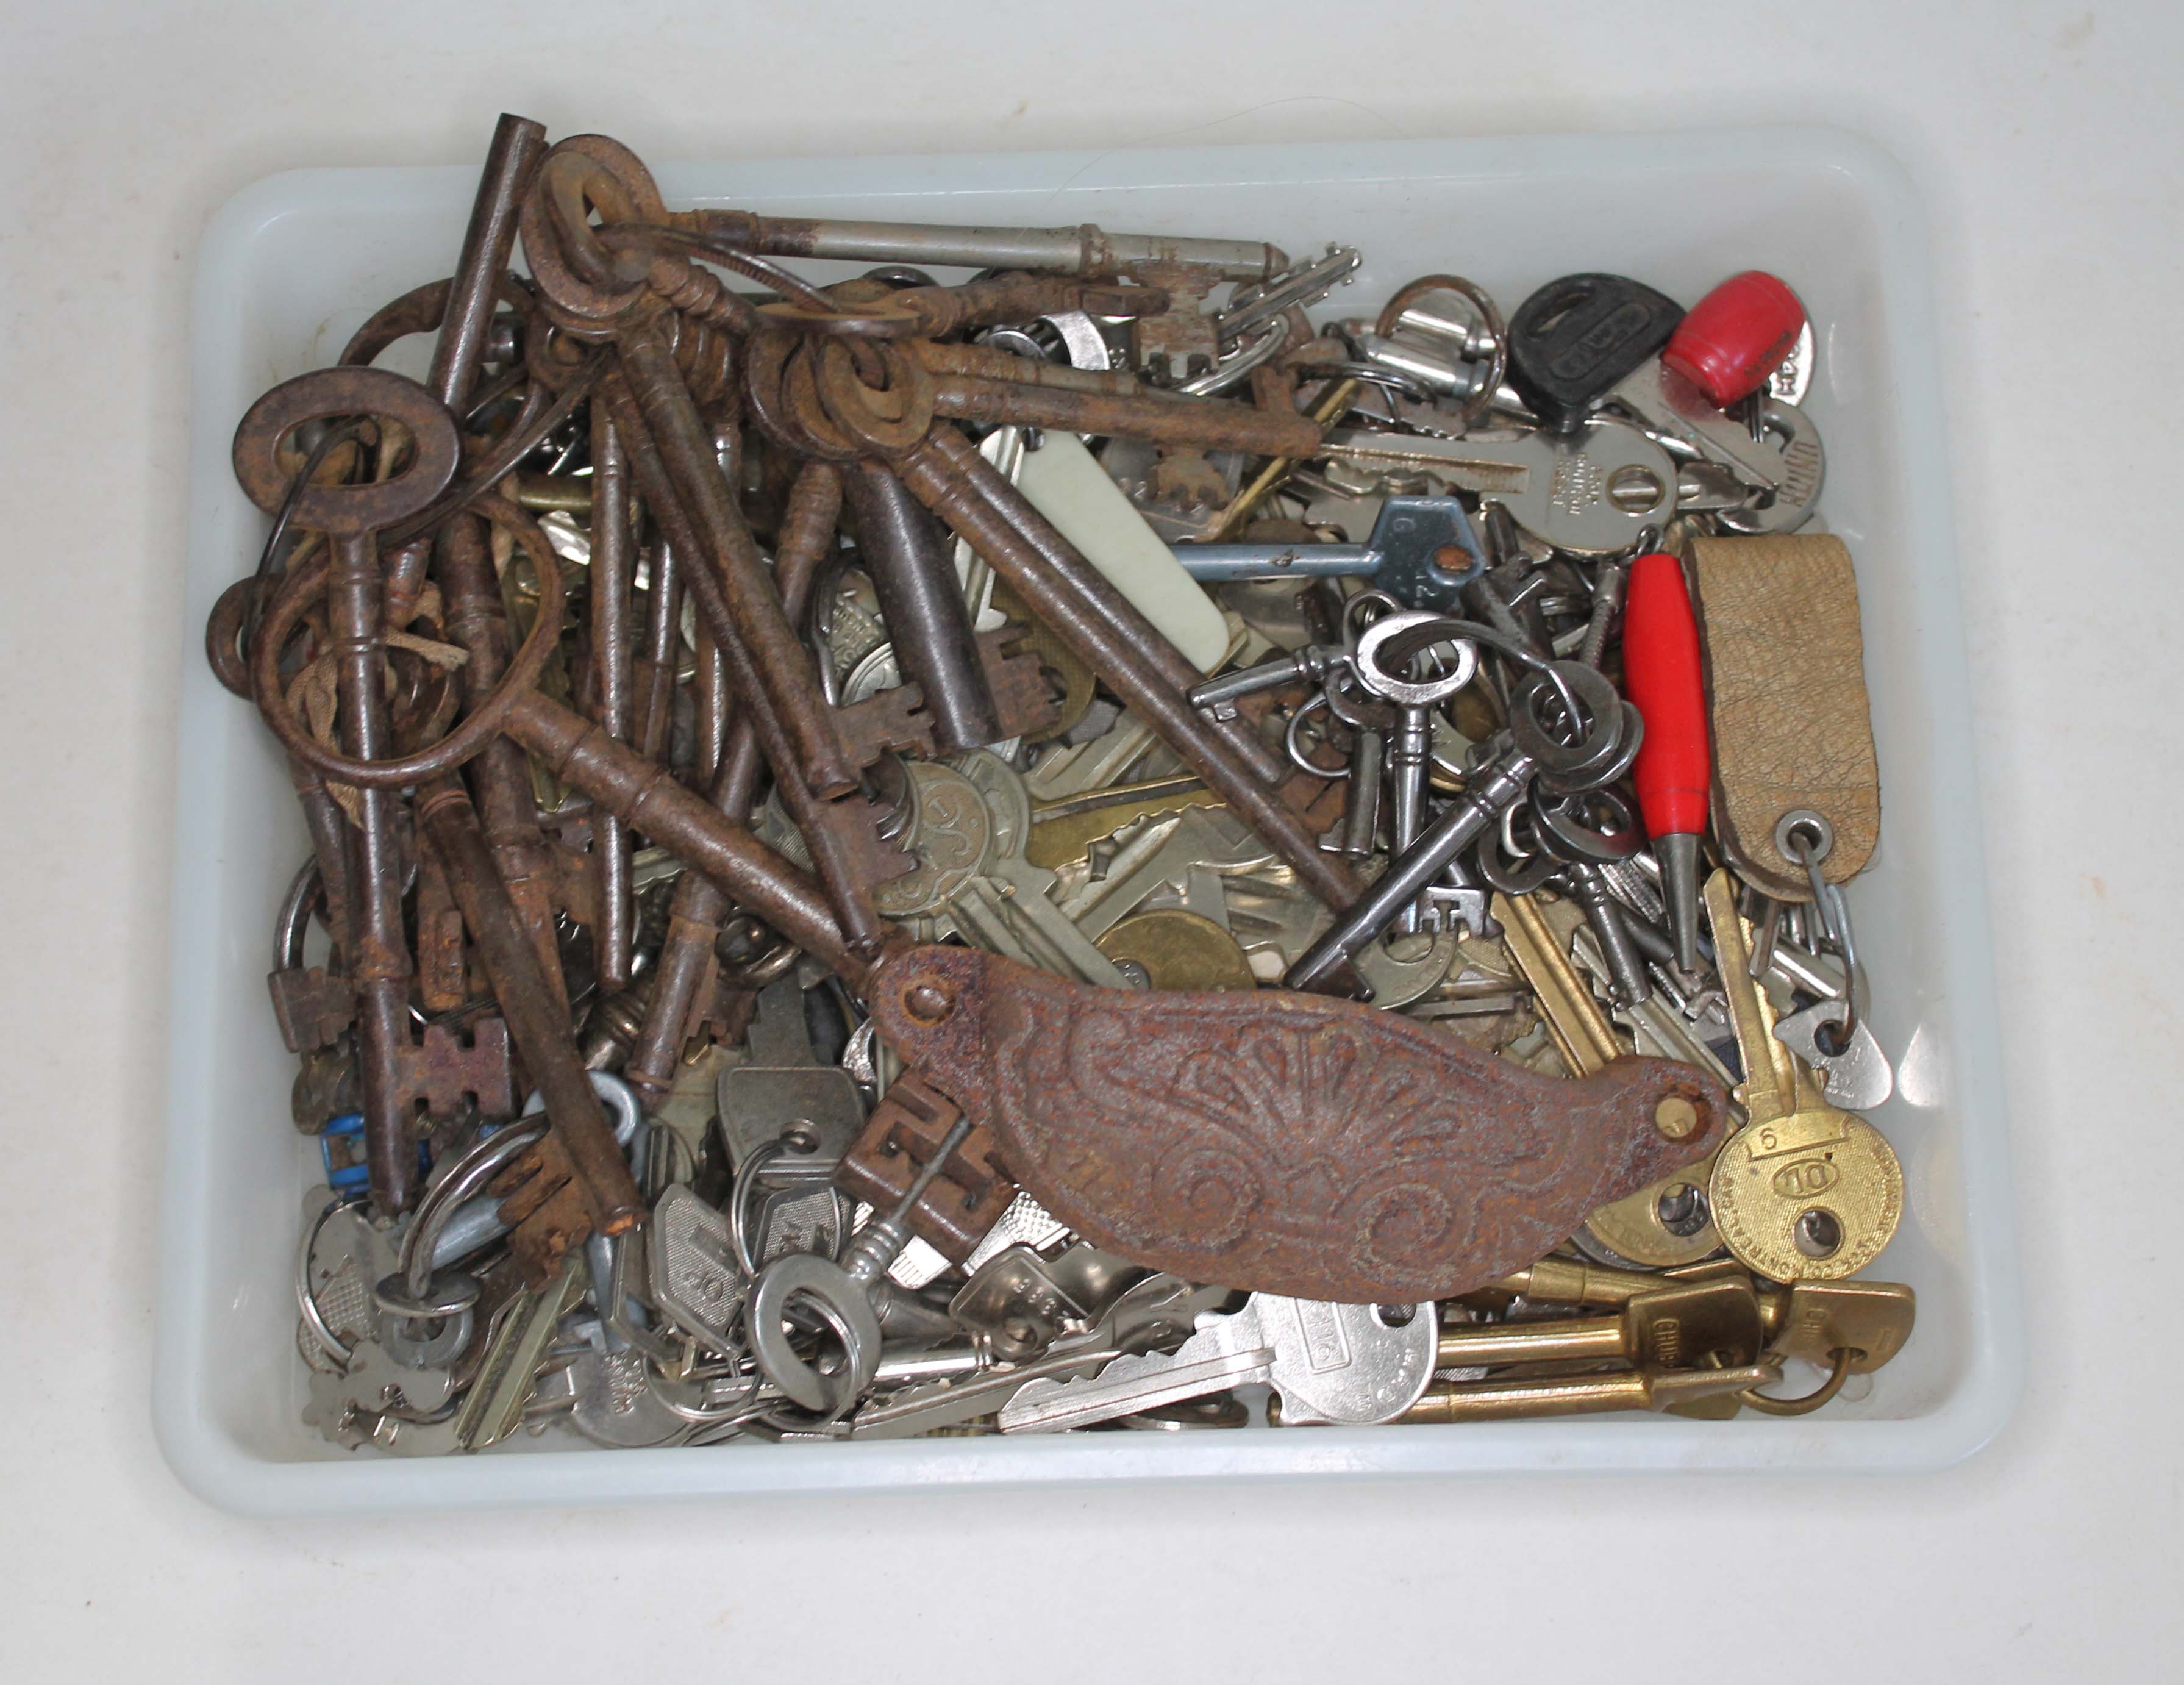 A collection of old keys.